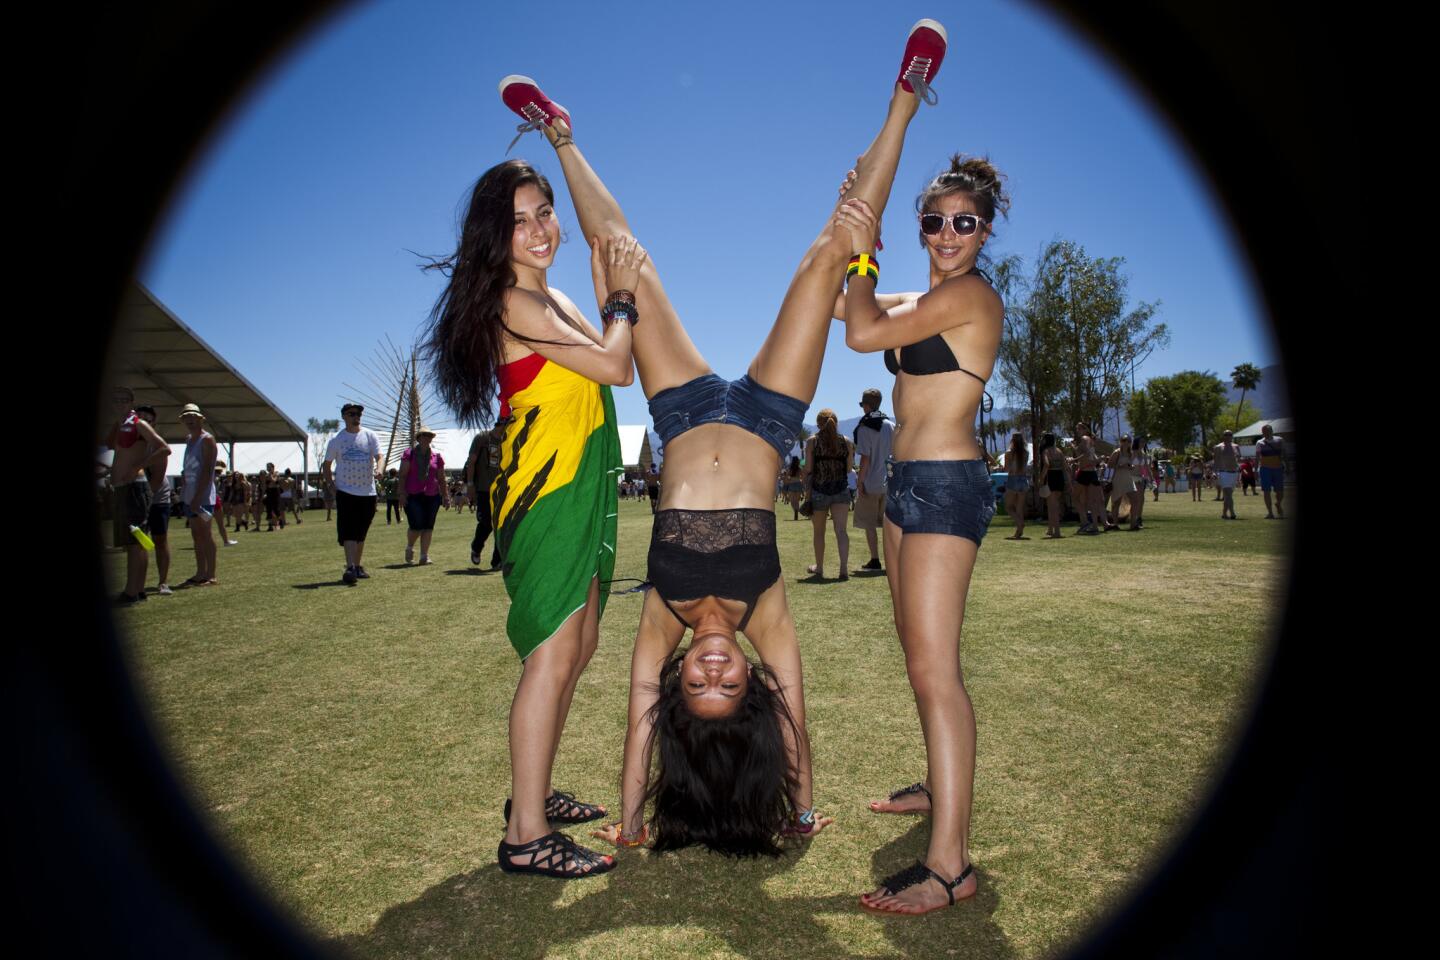 Aysha Quioz, 21, from left, Elizabeth Duran, 20 and Hayley Ferrano, 20, all from Riverside attending their first festival, pose for the Faces of Coachella gallery, on the first day of week two of the Coachella Valley Music and Arts Festival, 2012.